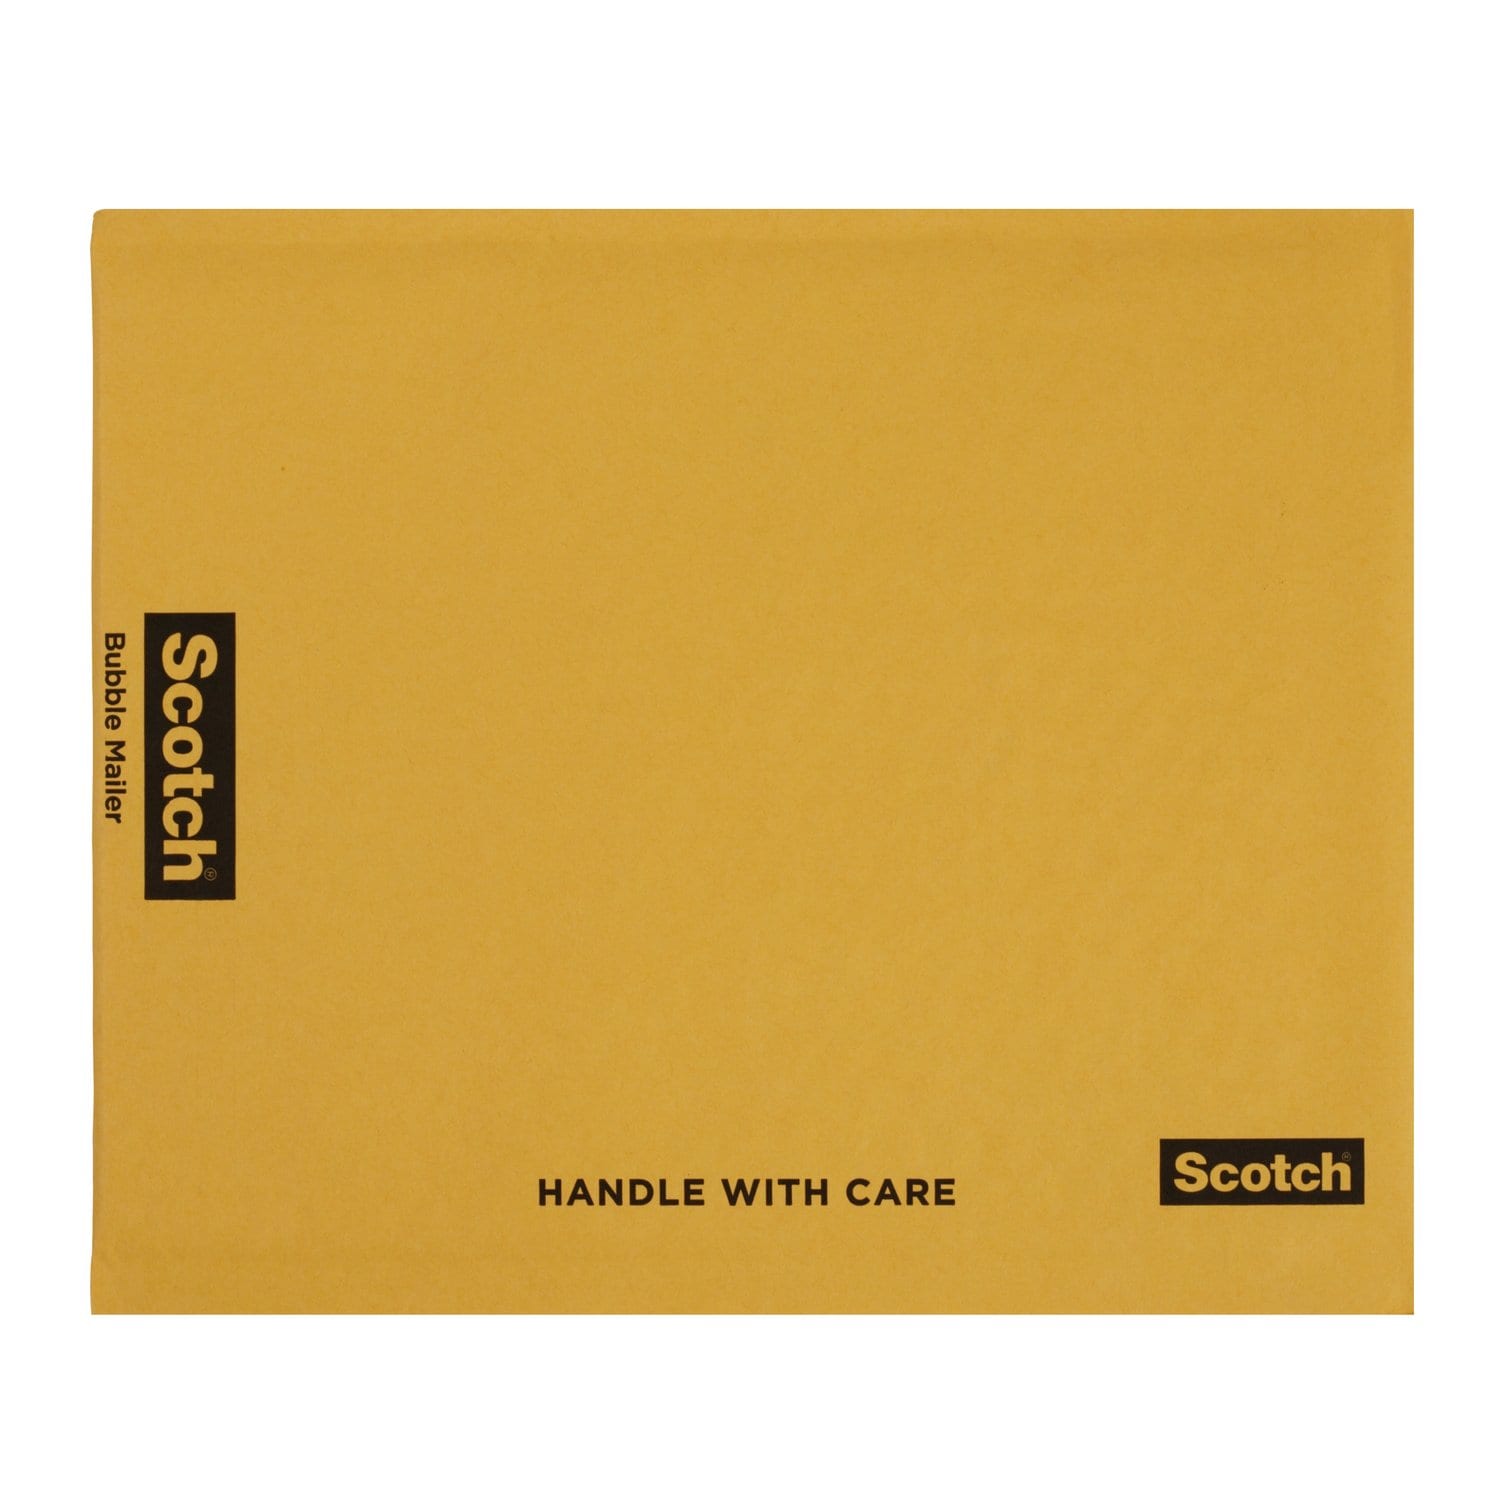 7010370778 - Scotch Bubble Mailer 7914, 8.5 in x 11 in, Size 2